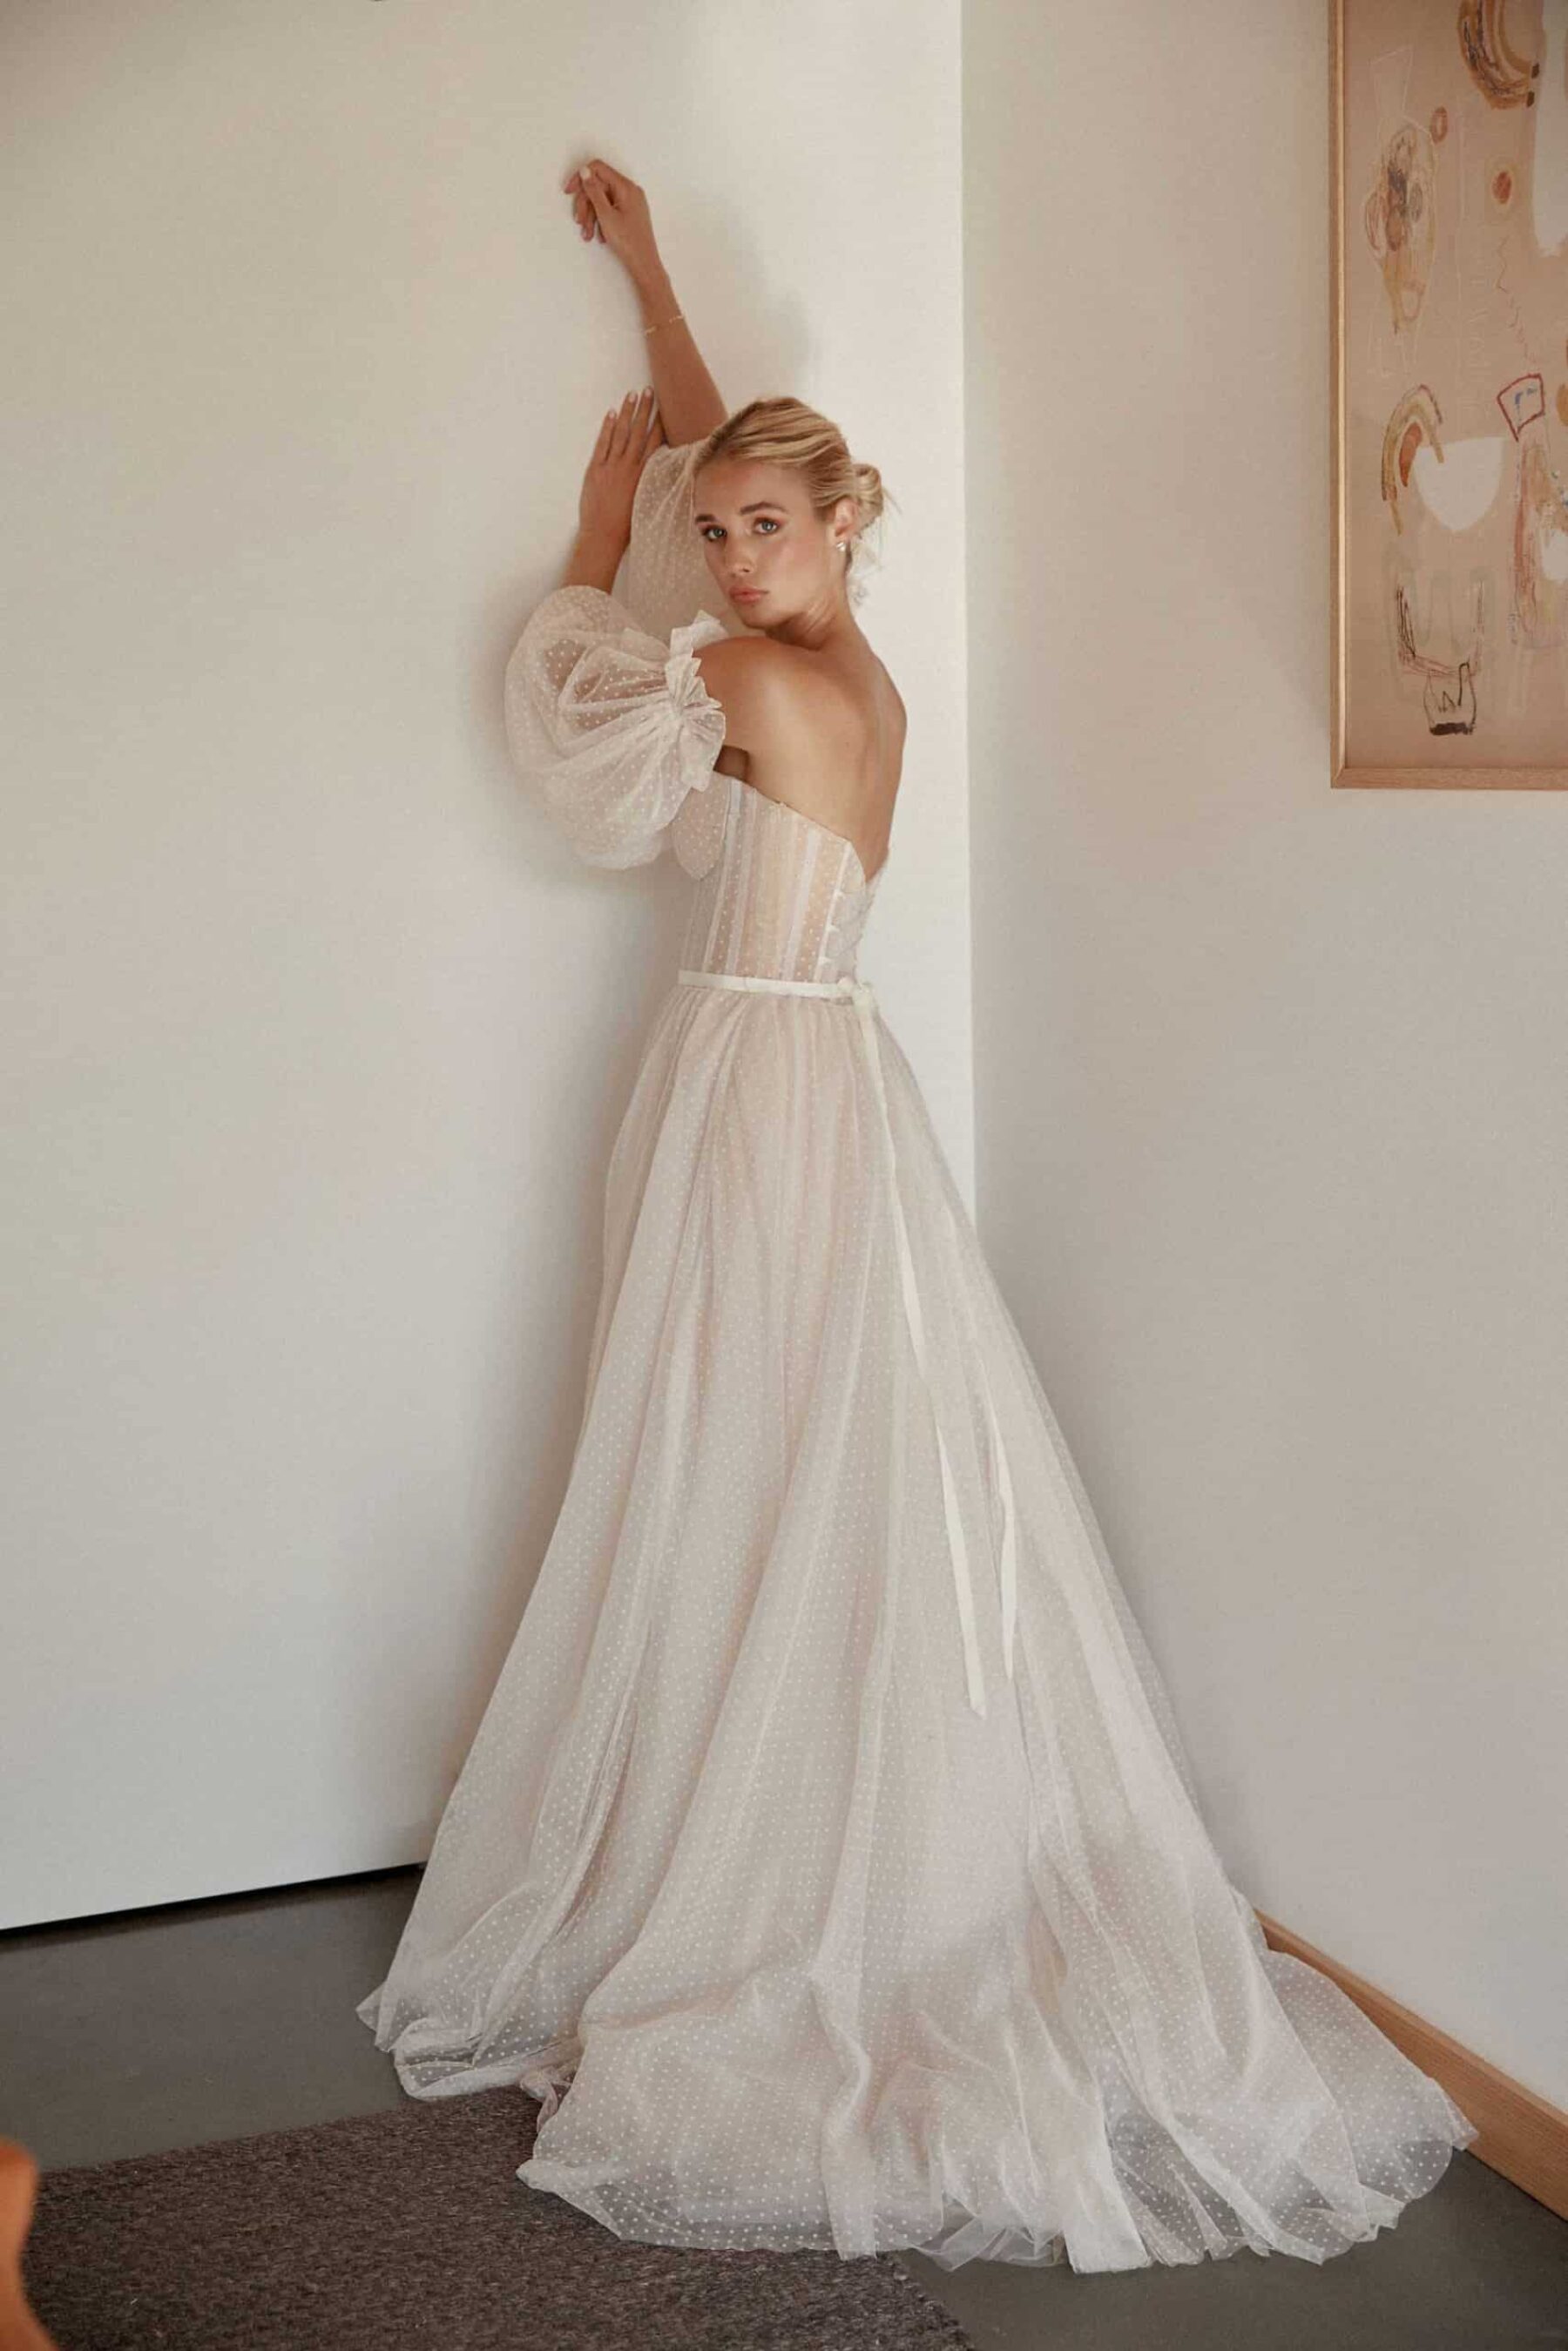 Lumiere - the 2020 Bespoke bridal collection by Karen Willis Holmes